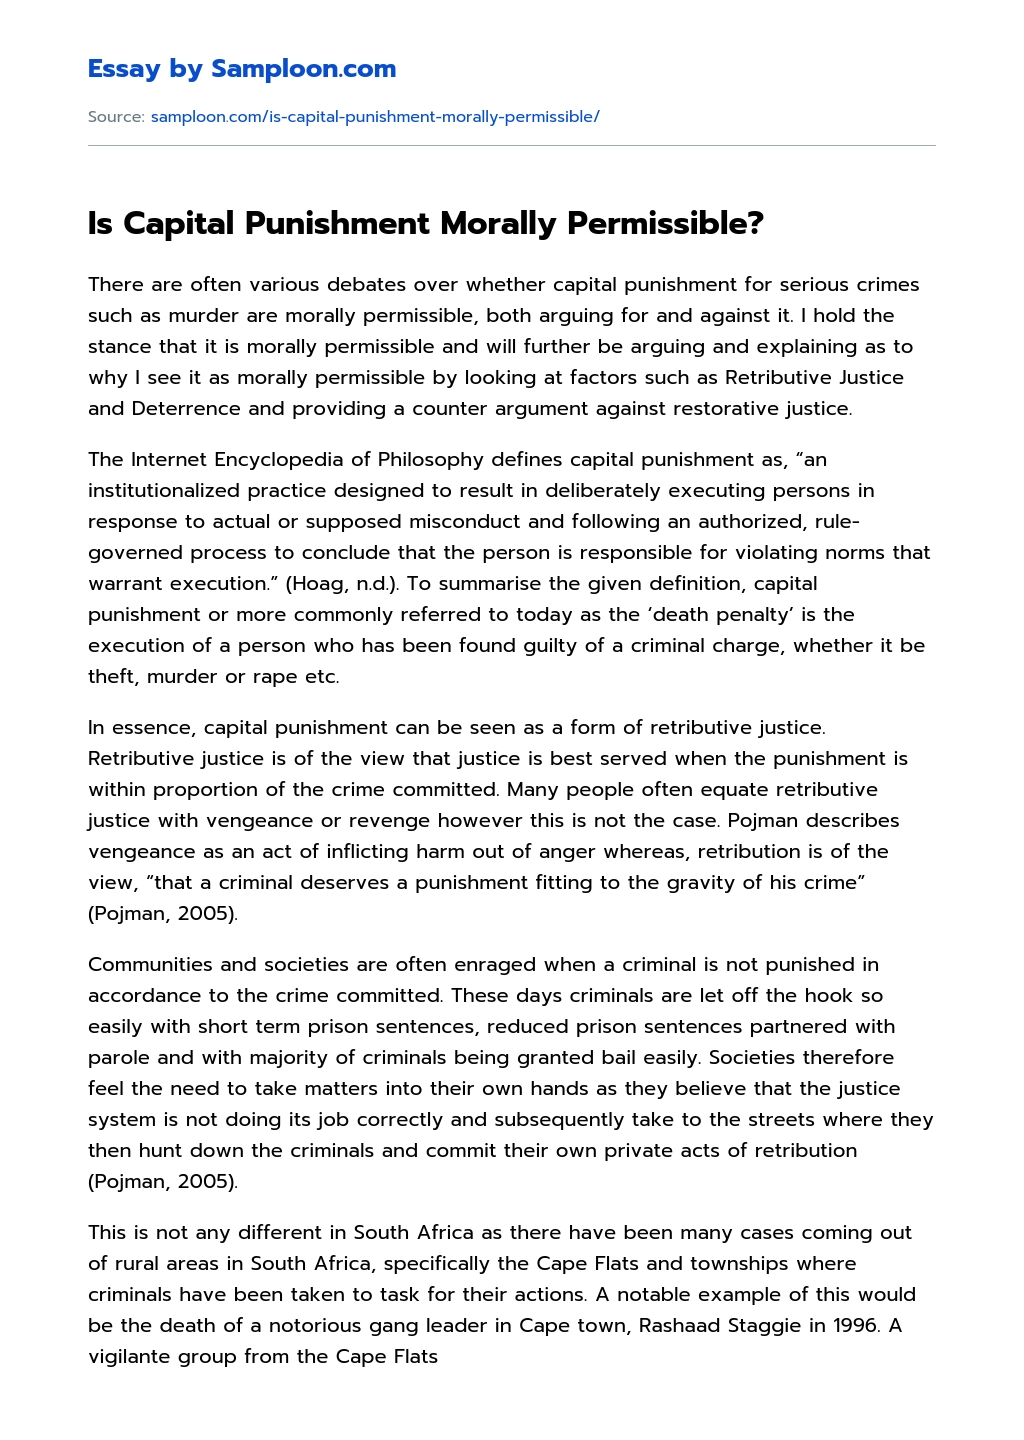 Is Capital Punishment Morally Permissible? essay